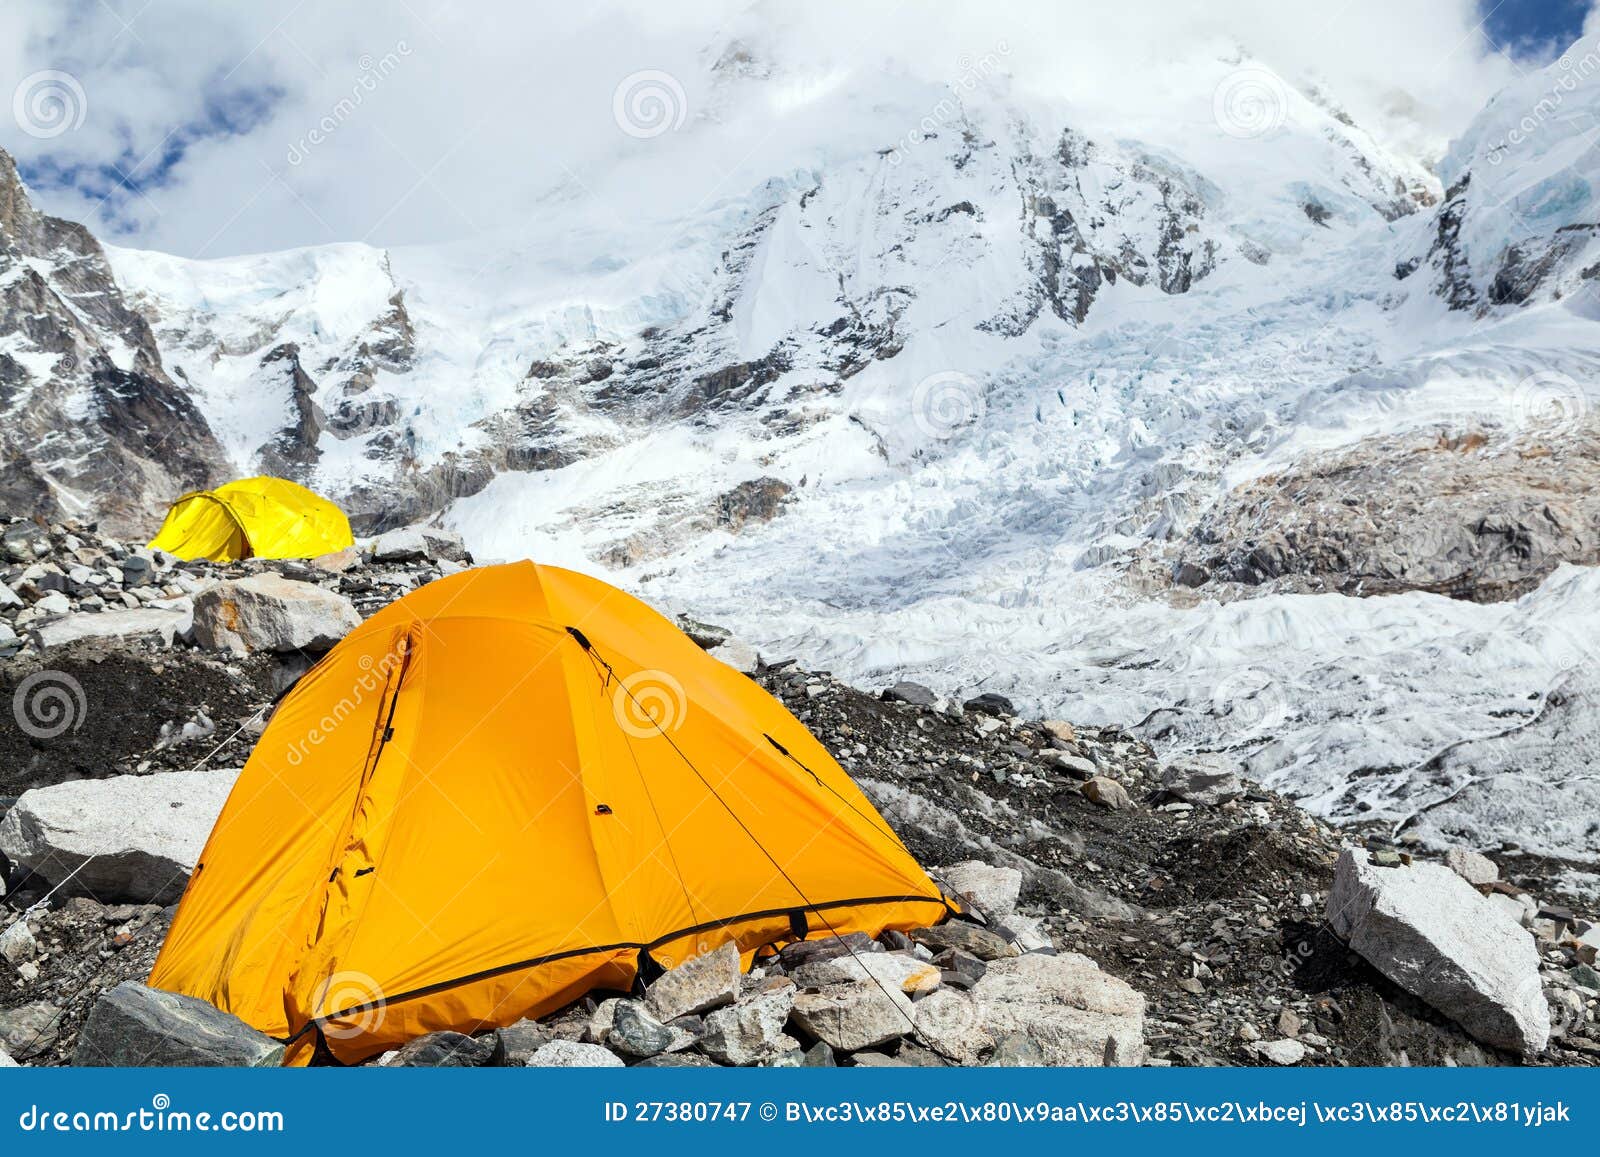 everest base camp and tent in himalaya mountains